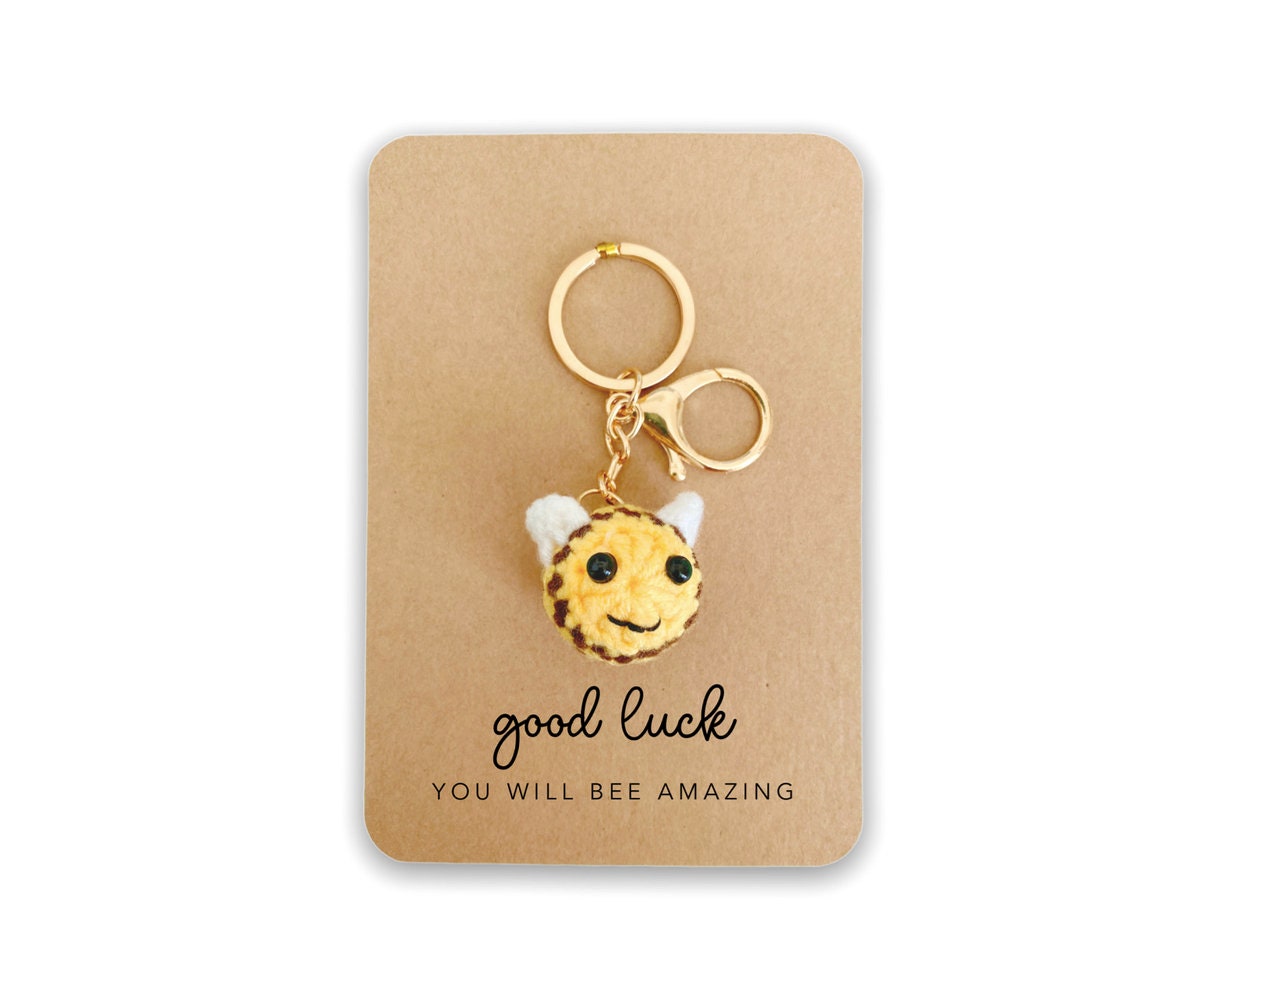 Good Luck Gift,  You Can Do It, New Job Good Luck Gift, Well Done Keyring Bee, You Got This Good Luck, Good Luck, Bee Keyring Gift, Handmade